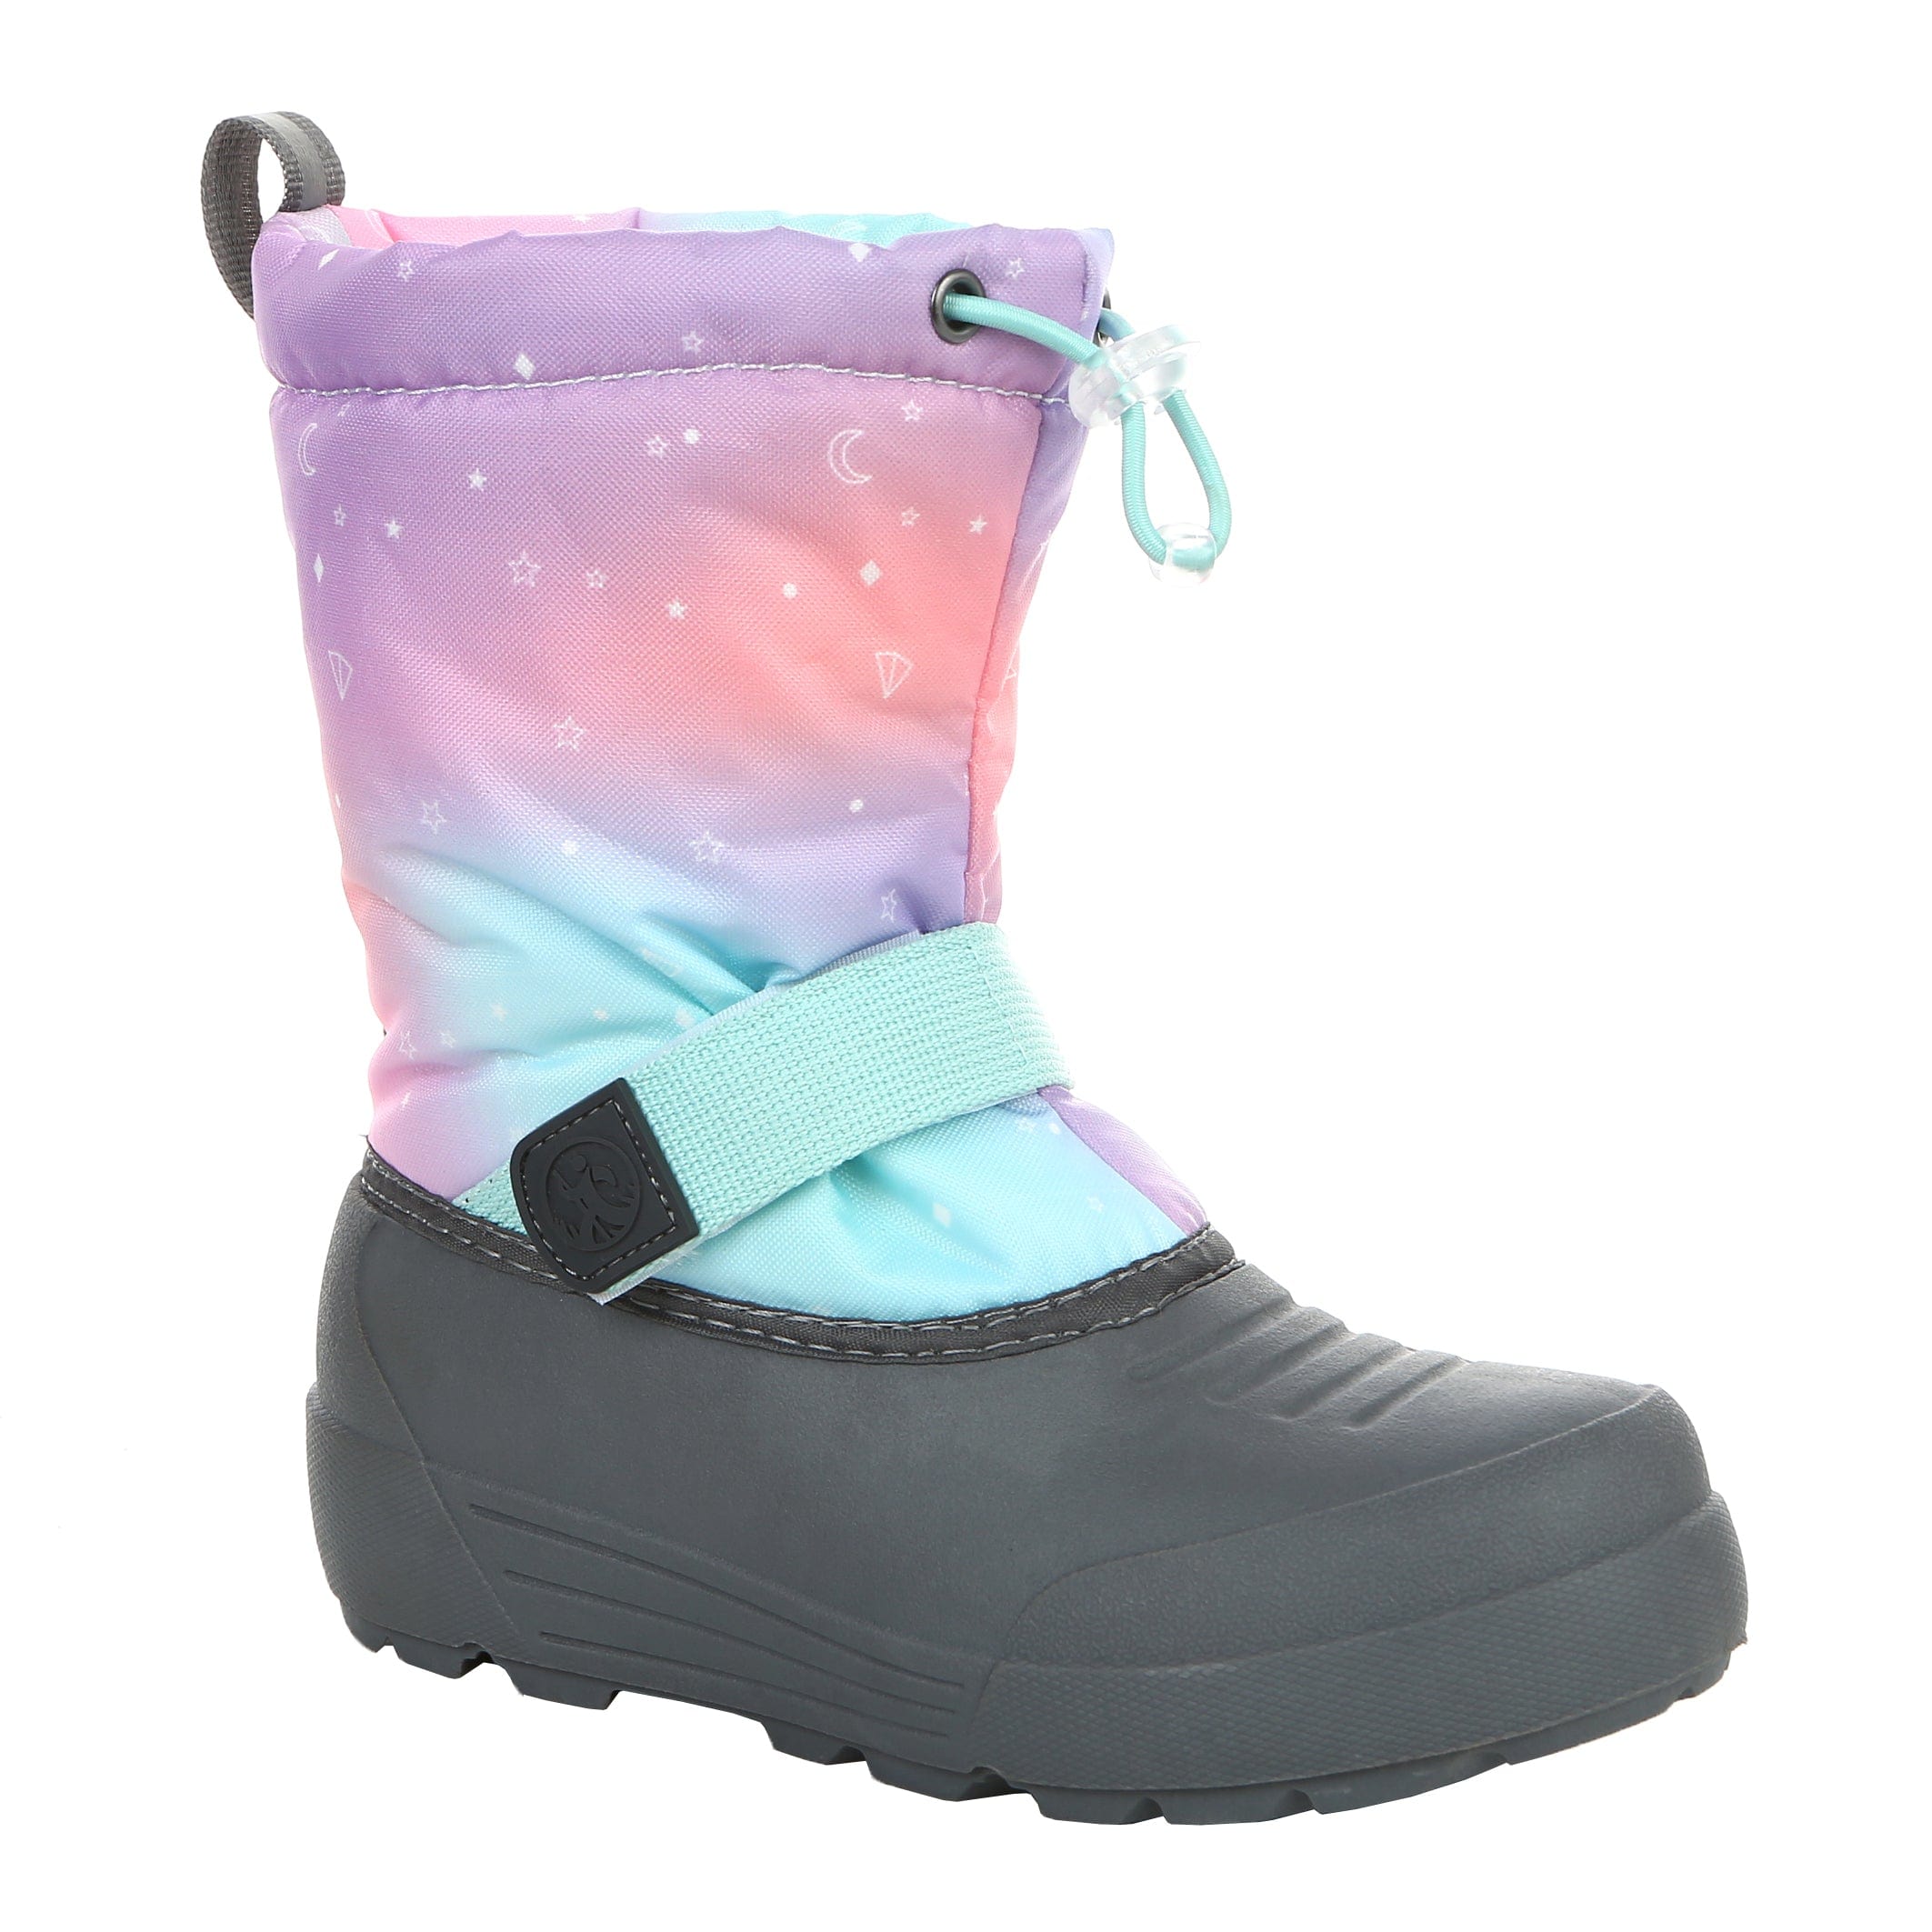 Toddler's Frosty Insulated Winter Snow Boot